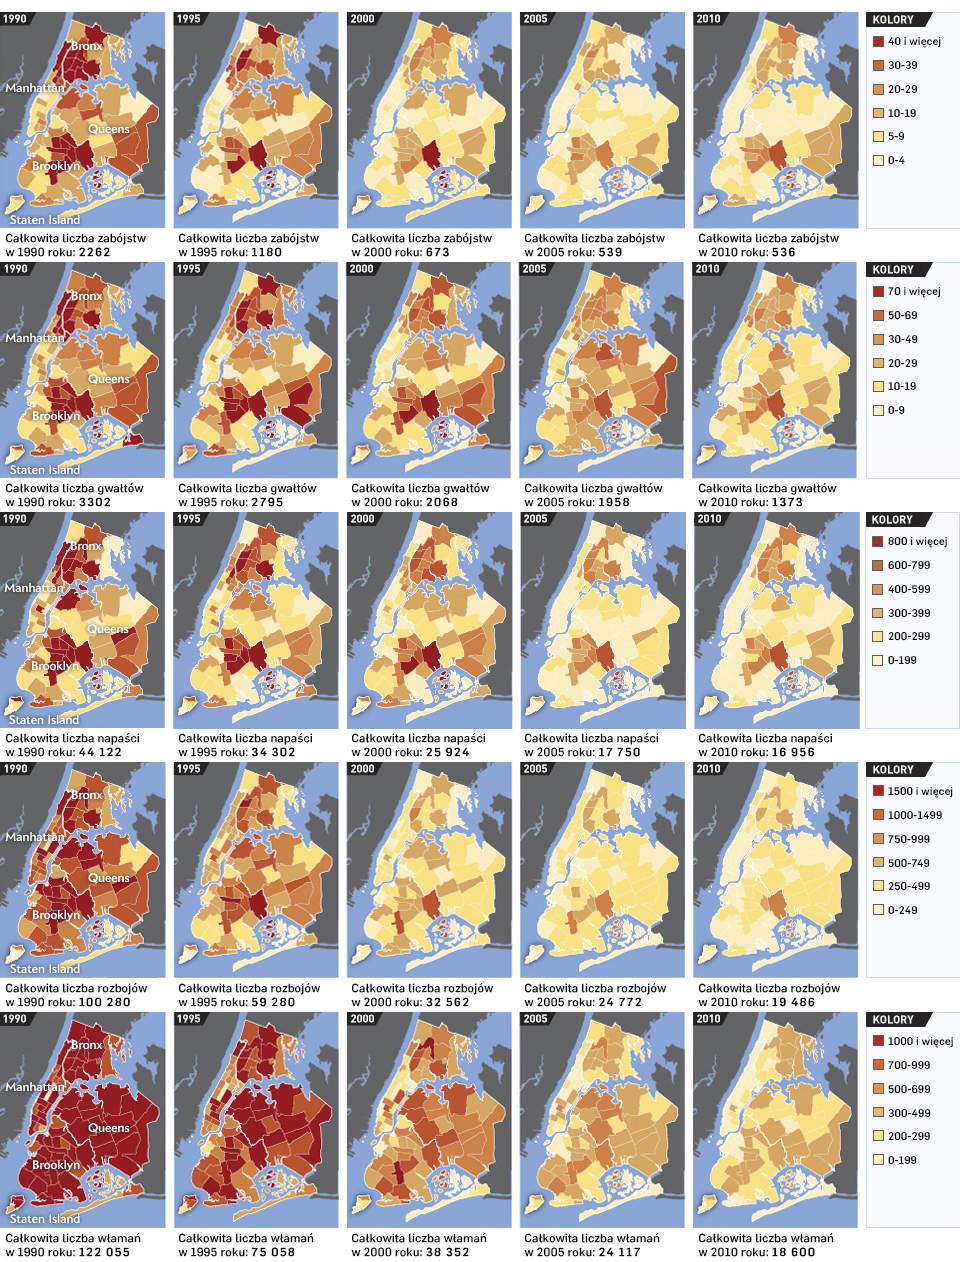 nyc_stats_maps